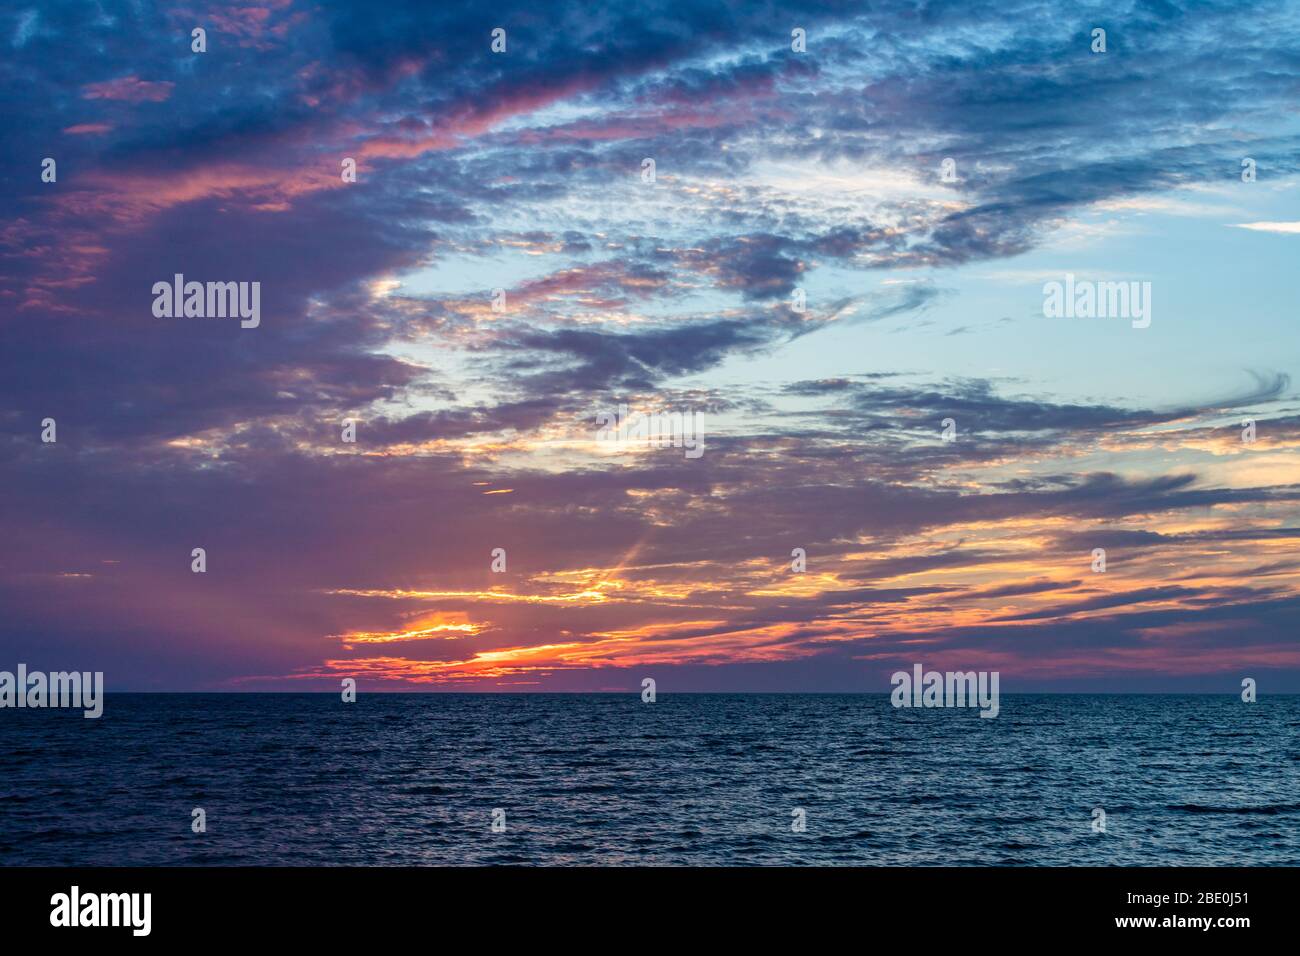 Pink sky and light rays shining through clouds as sun sets on ocean. Stock Photo